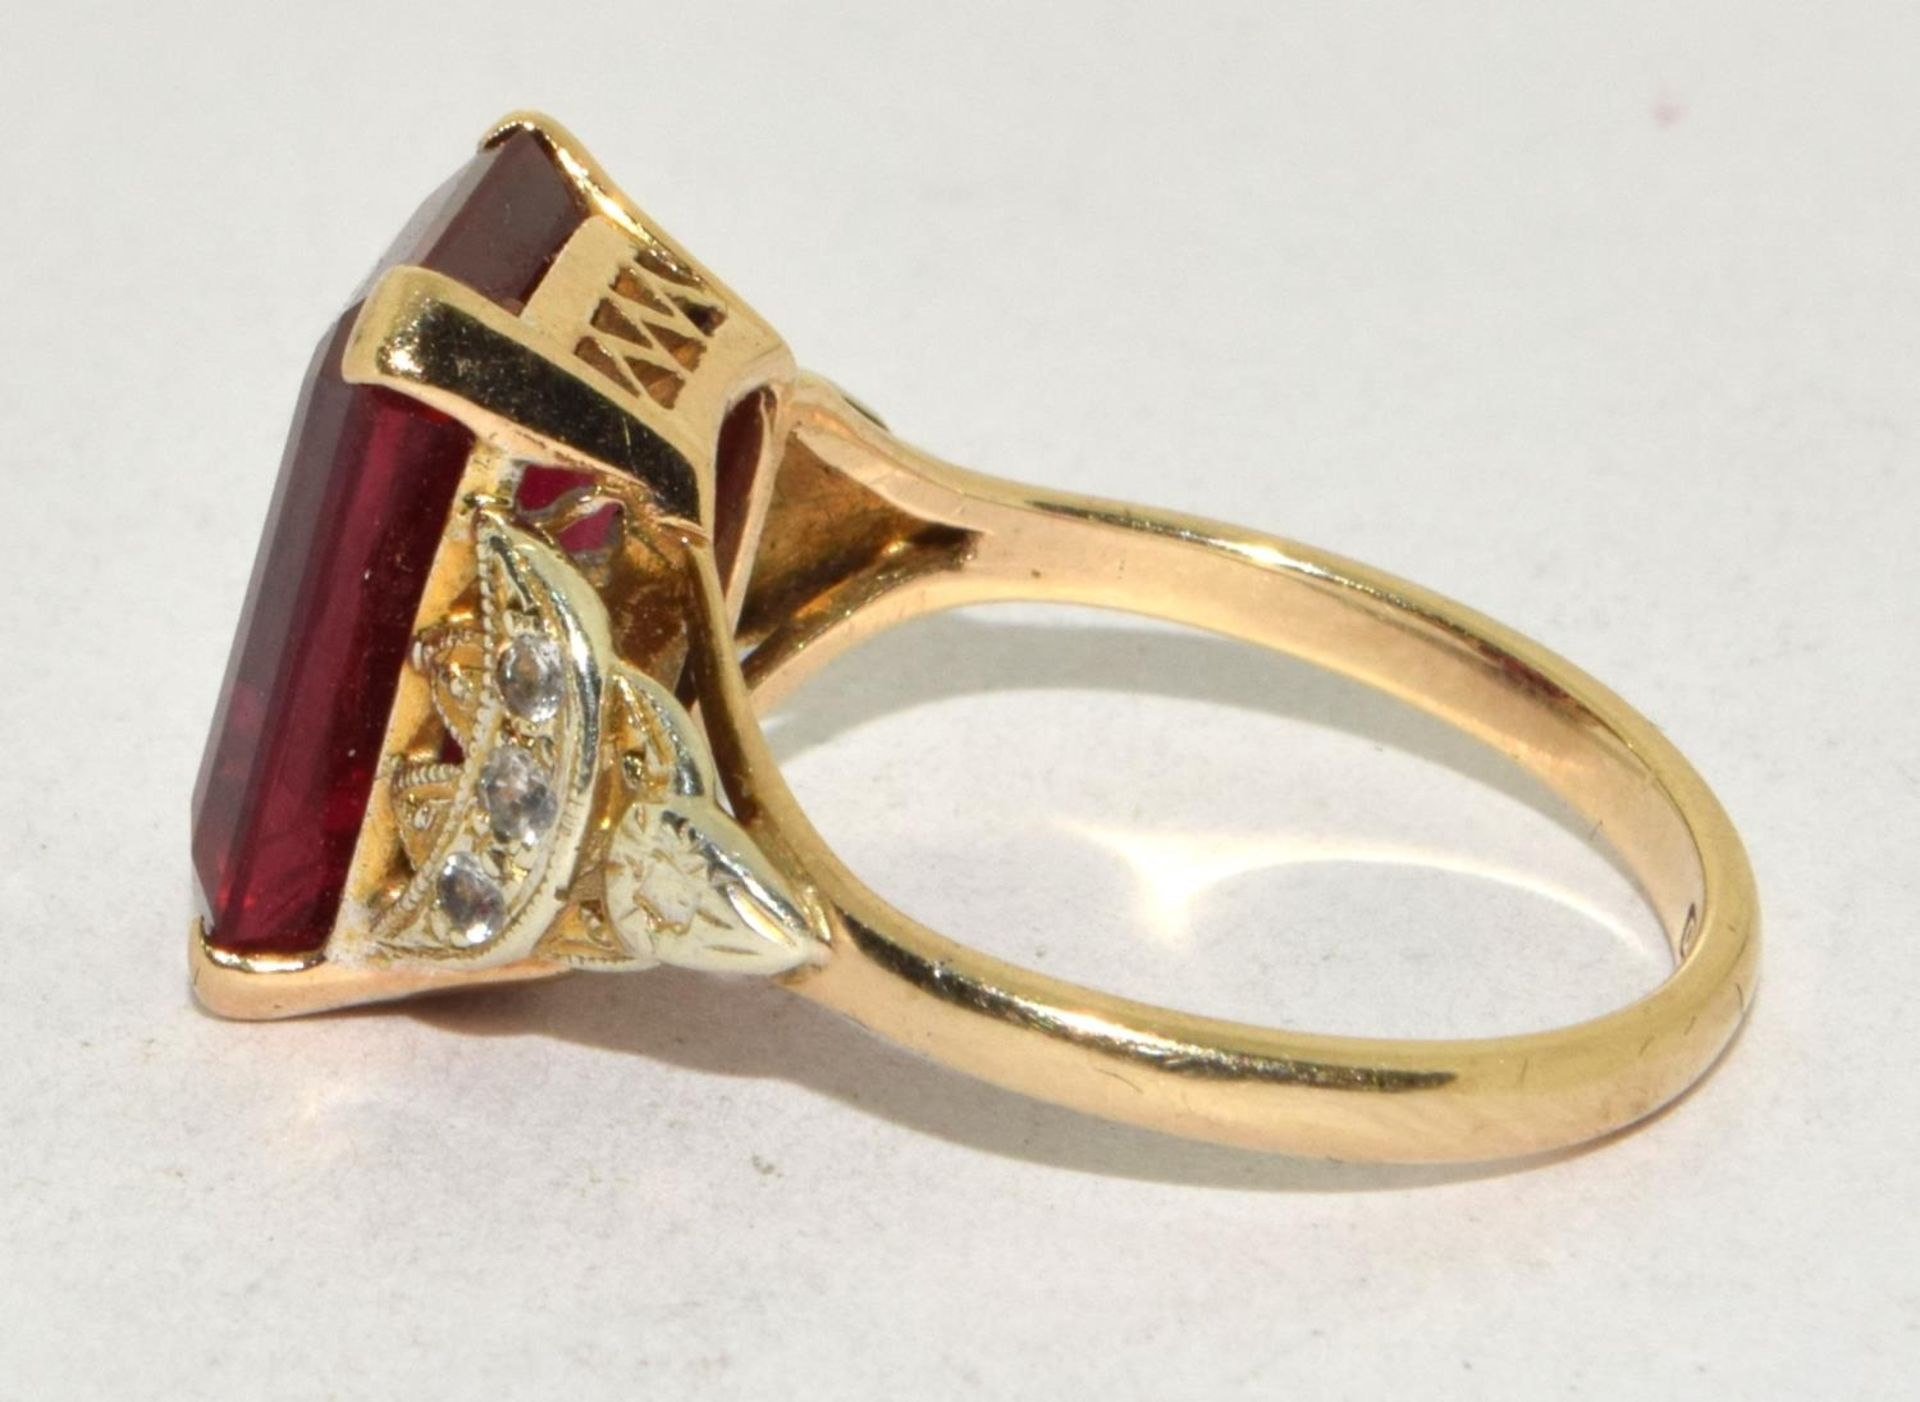 9ct gold ladies Large Ruby square set ring with diamonds to the shank set in an open work setting - Image 2 of 5